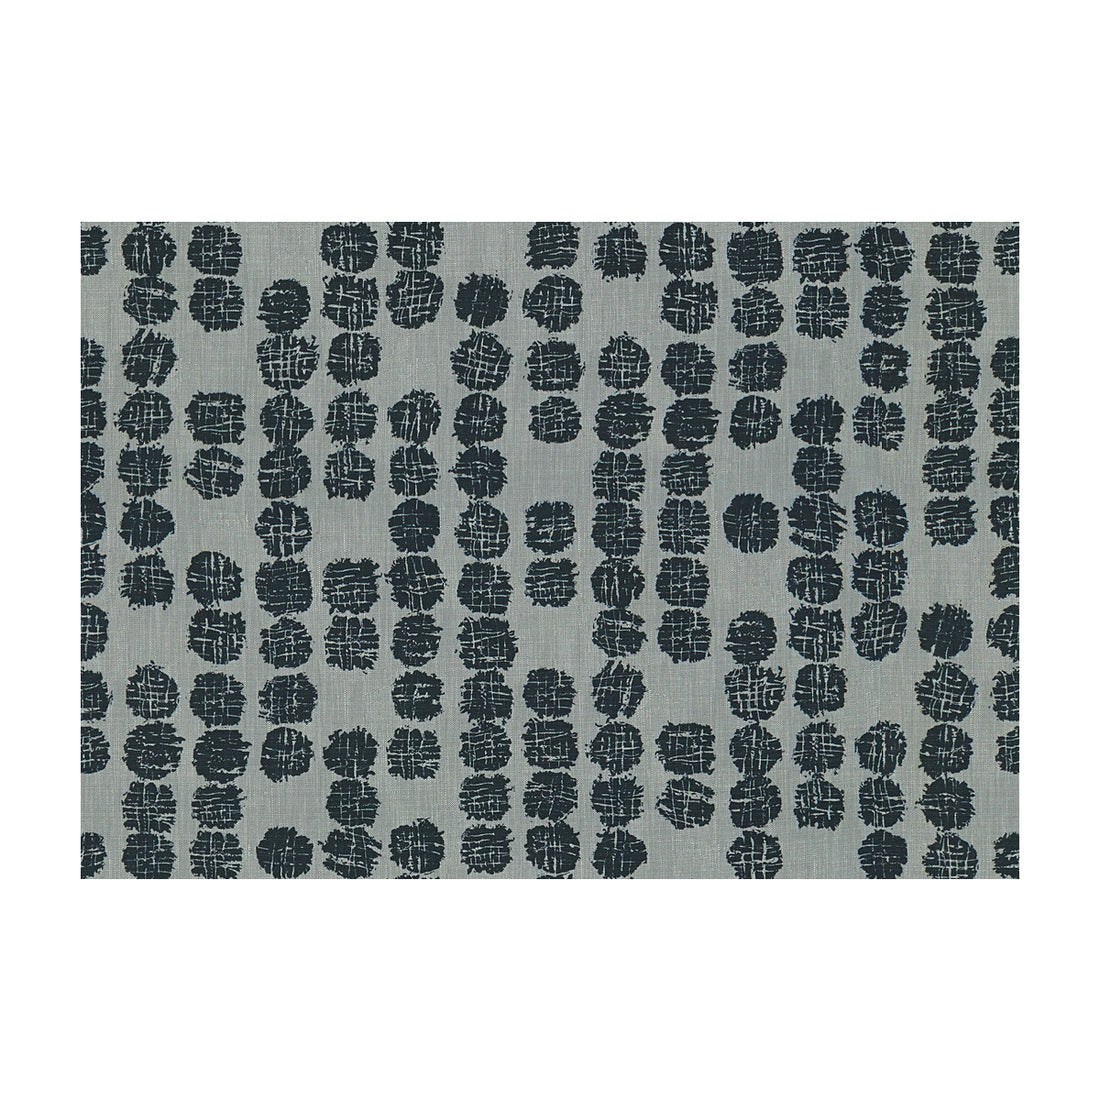 Solstice fabric in smoke/pyrite color - pattern GWF-3428.811.0 - by Lee Jofa Modern in the Kelly Wearstler Terra Firma Textiles collection